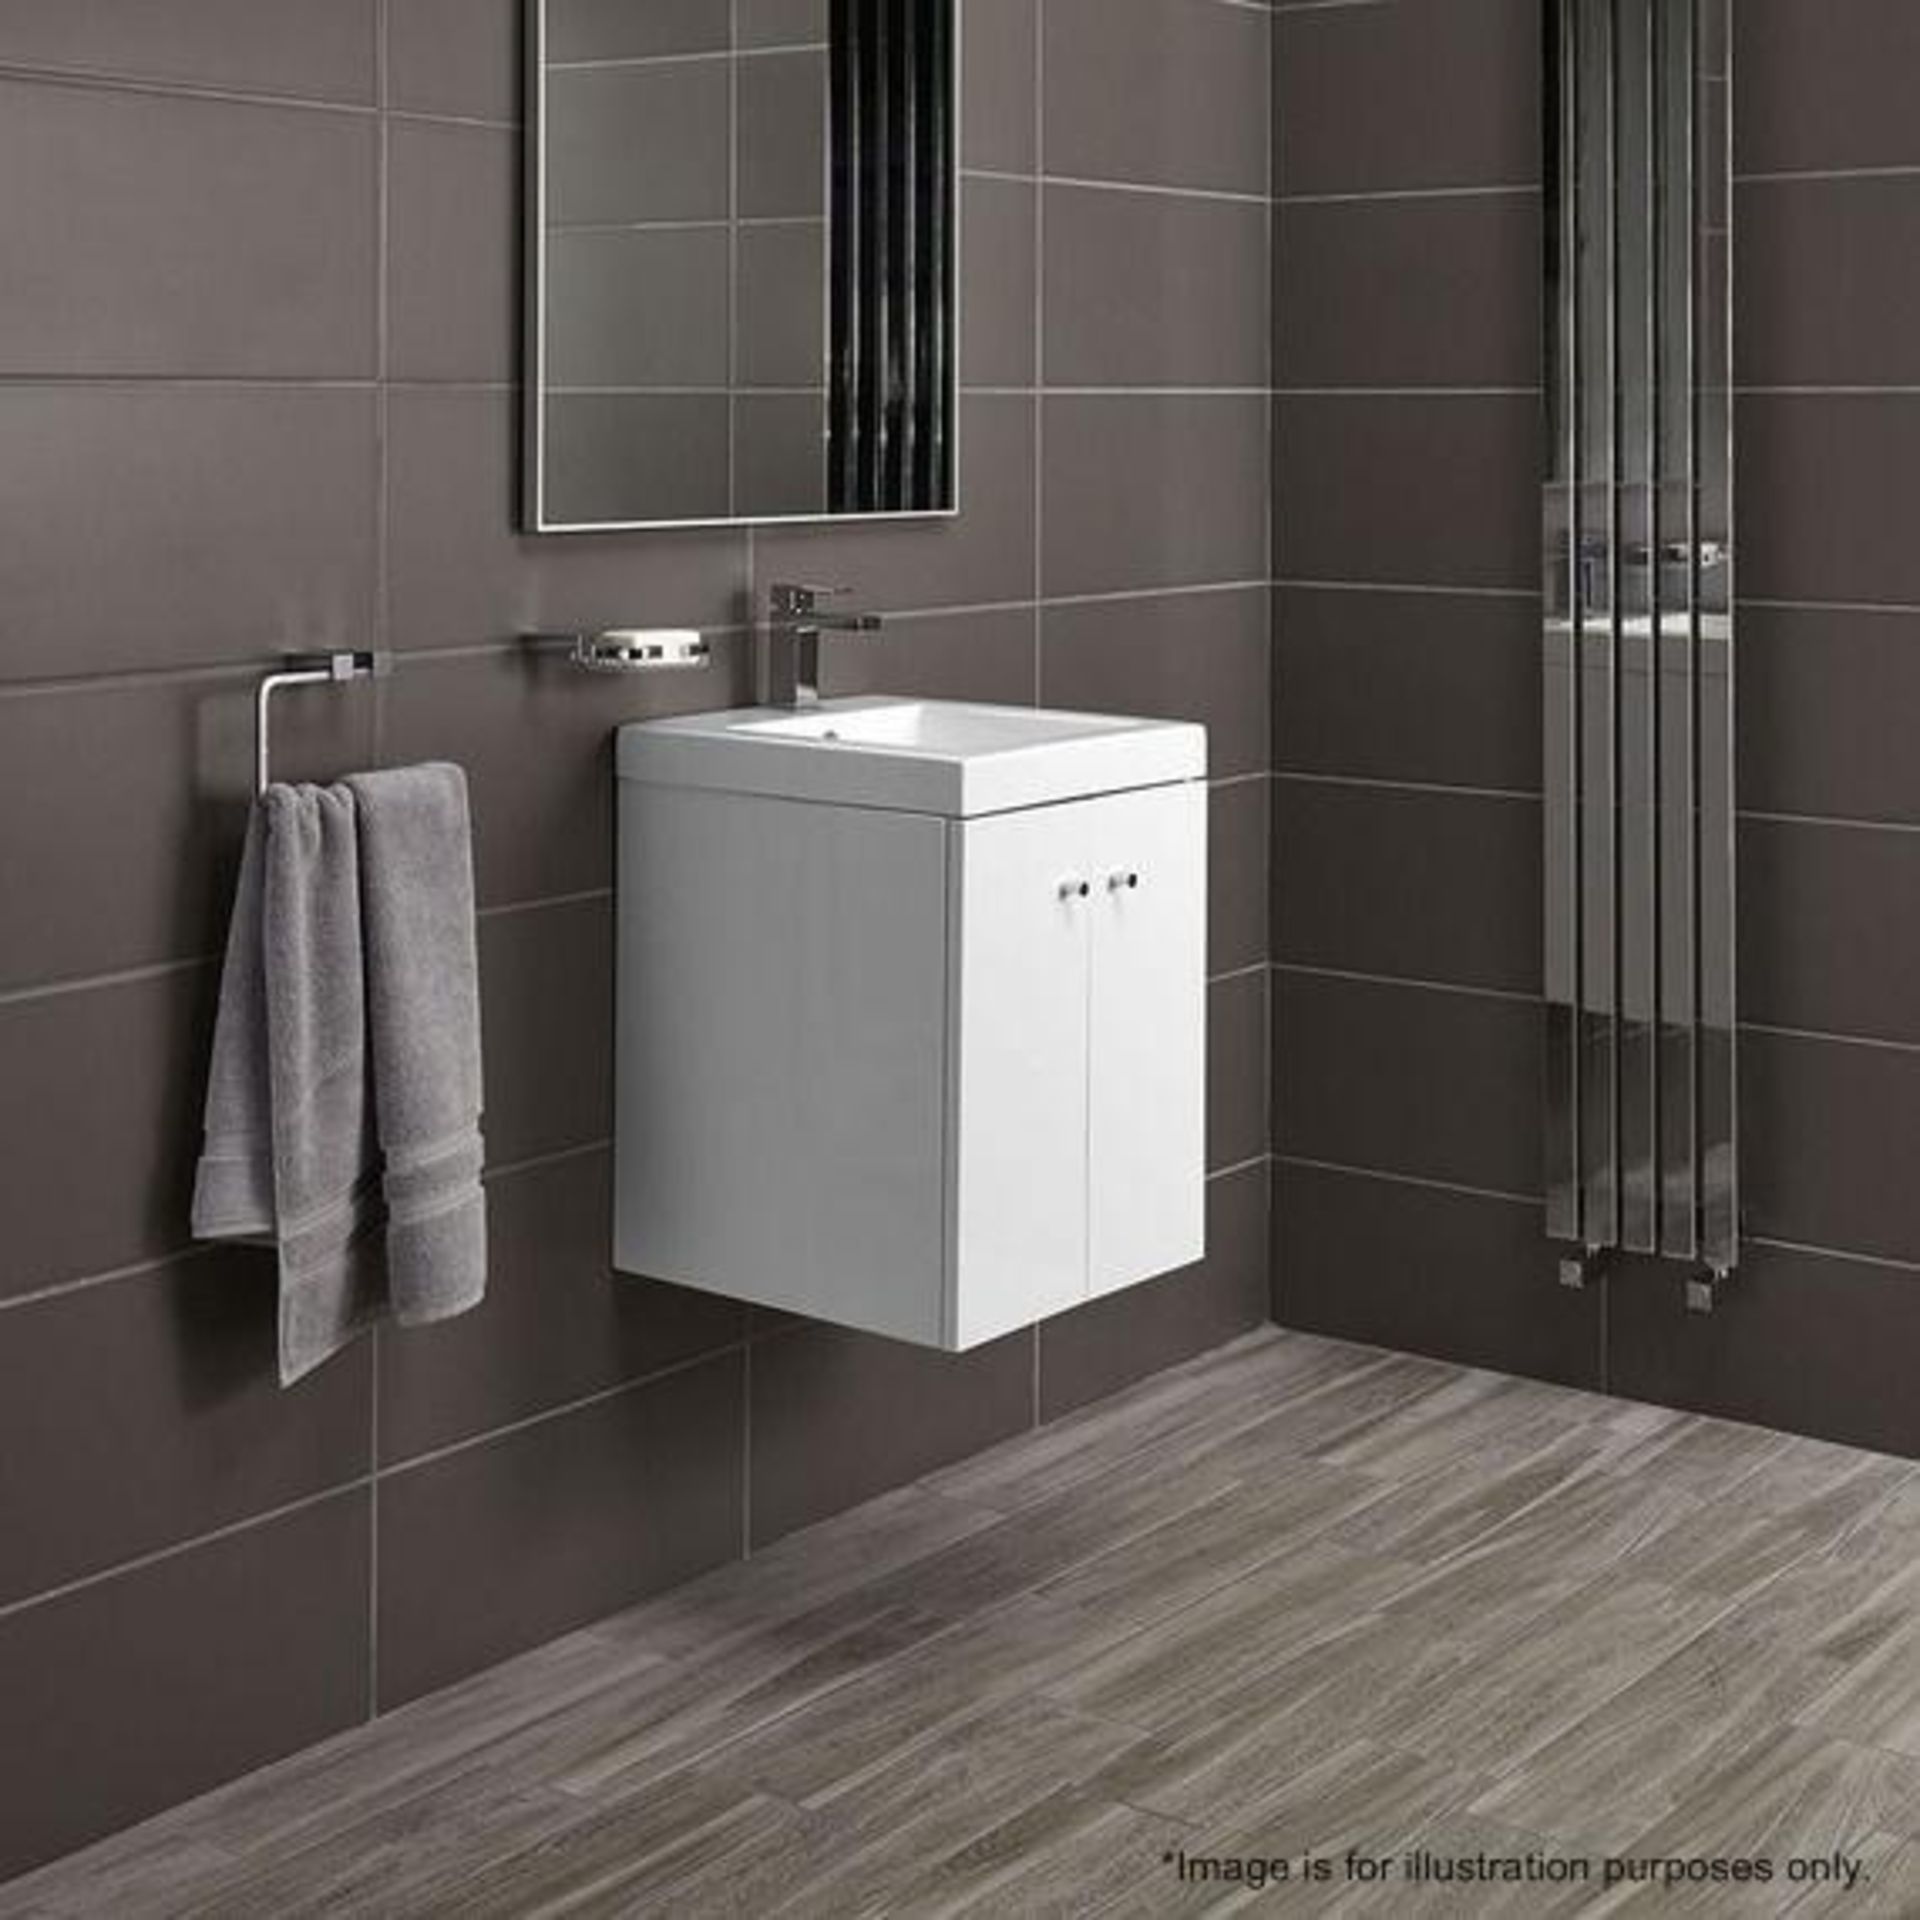 10 x Alpine Duo 400 Wall Hung Vanity Units In Gloss White - Brand New Boxed Stock - Dimensions: H49 - Image 4 of 5